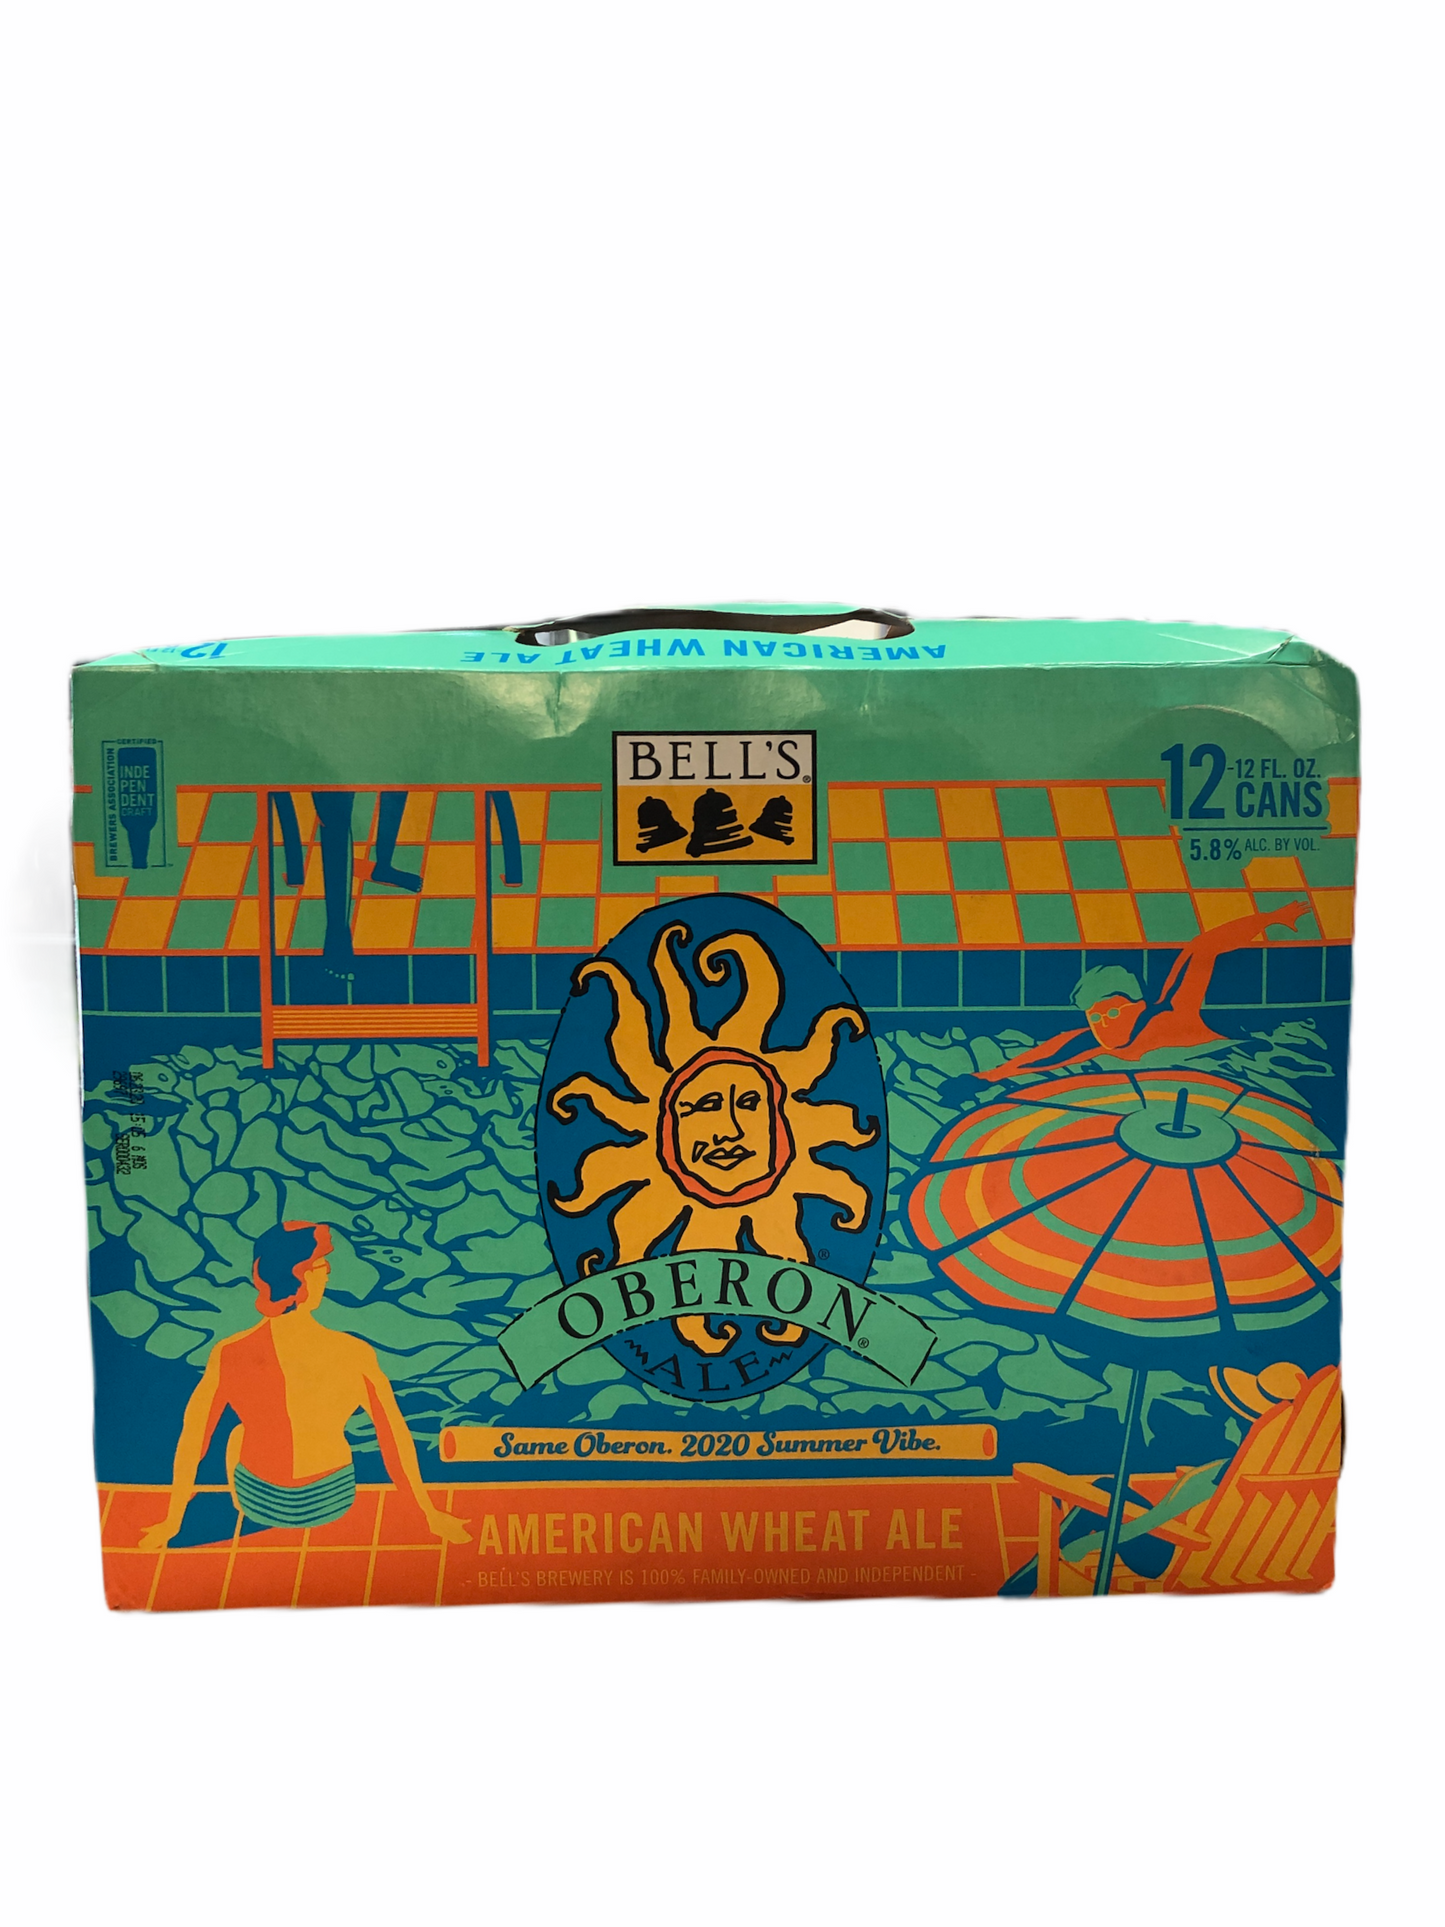 BELL'S OBERON 12 PK 12 PACK CANS